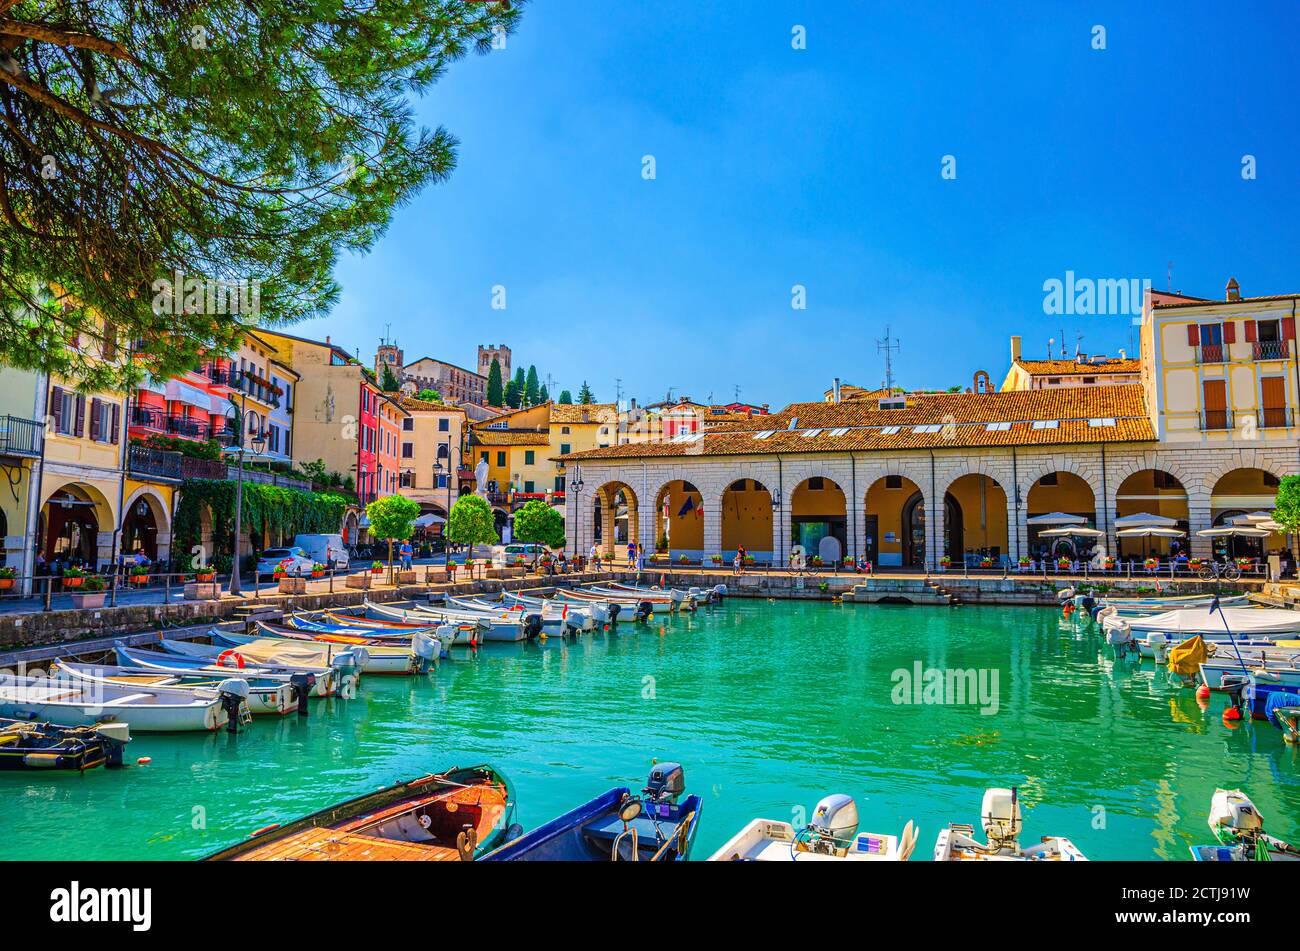 Old harbour Porto Vecchio with motor boats on turquoise water, green trees and traditional buildings in historical centre of Desenzano del Garda town, blue sky background, Lombardy, Northern Italy Stock Photo